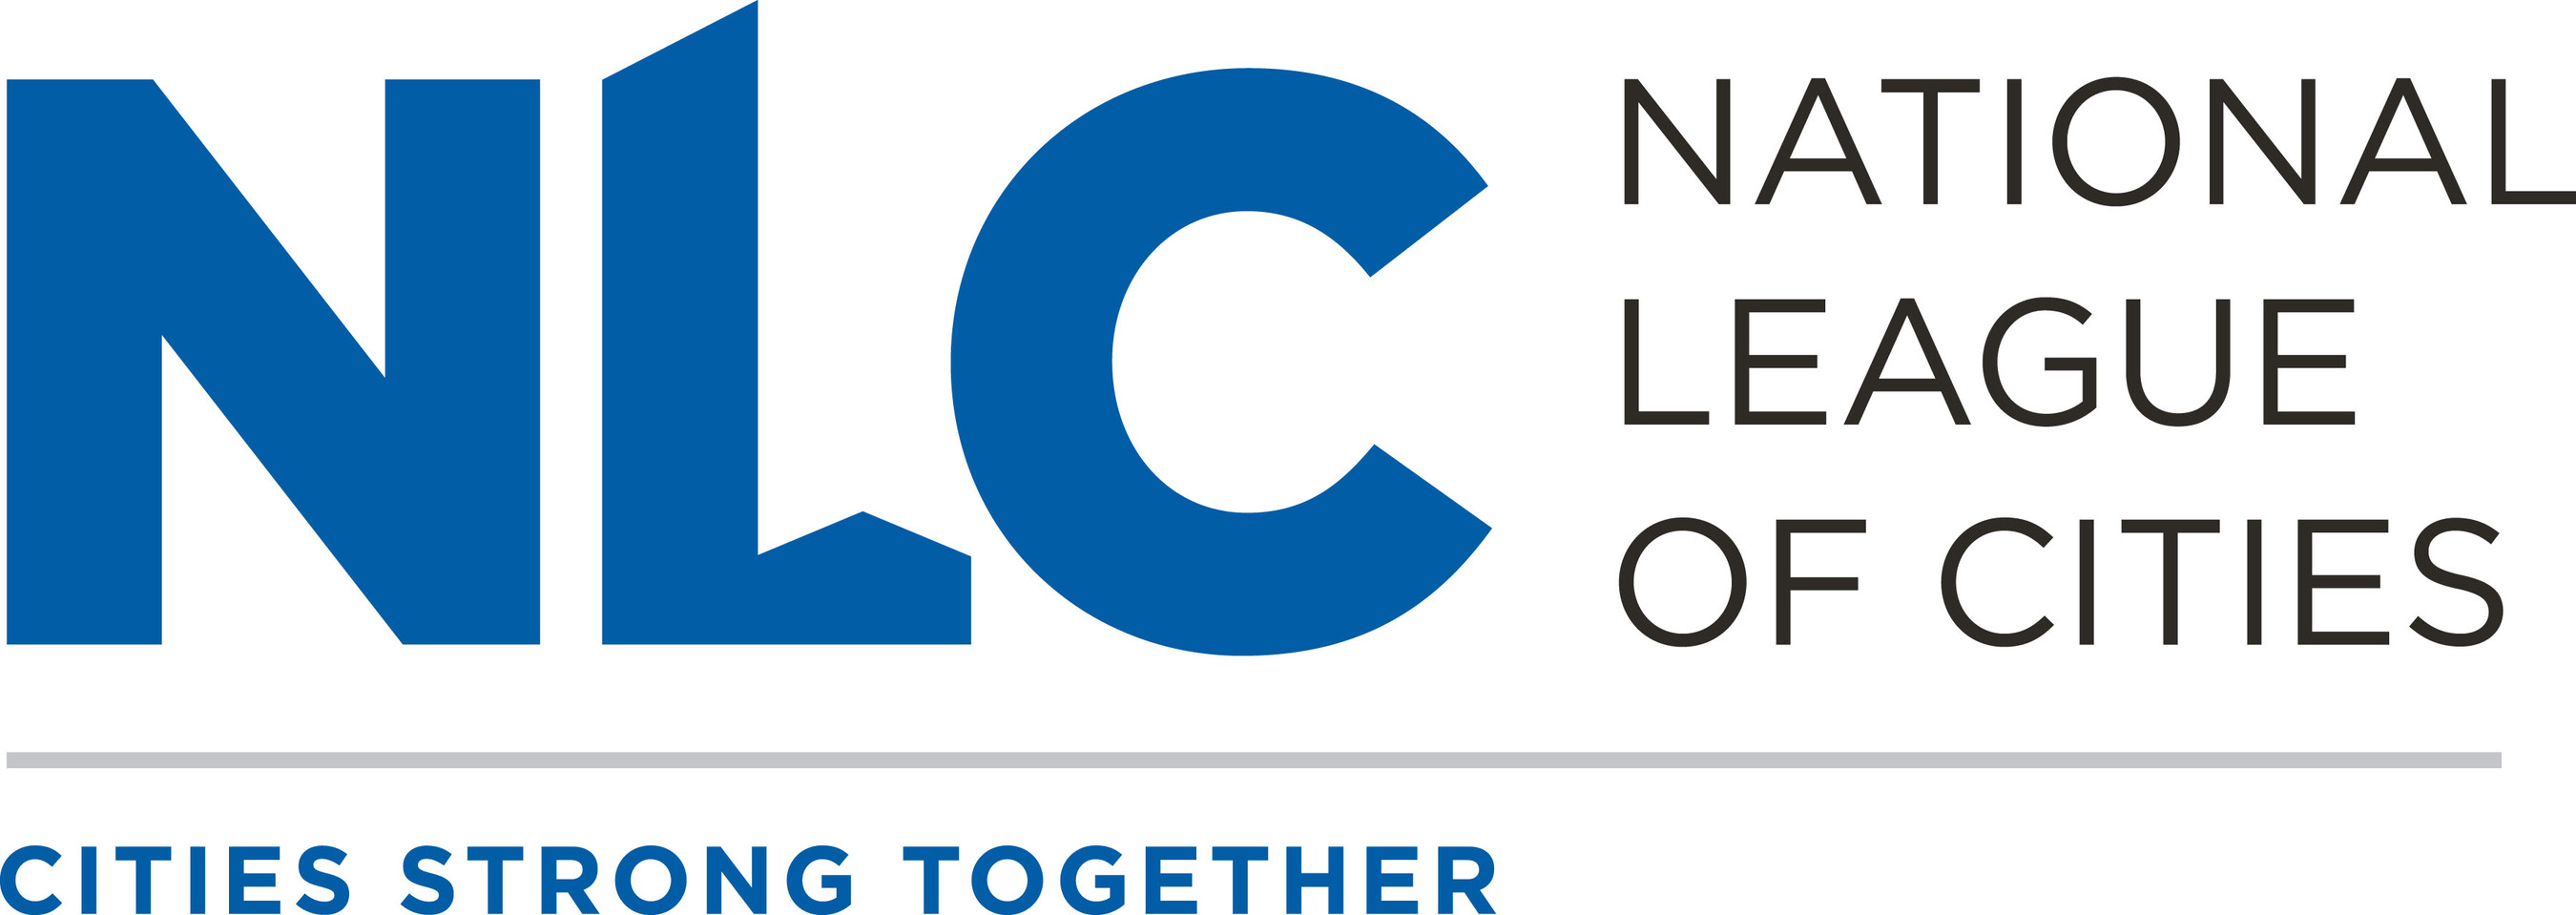 National League of Cities logo.